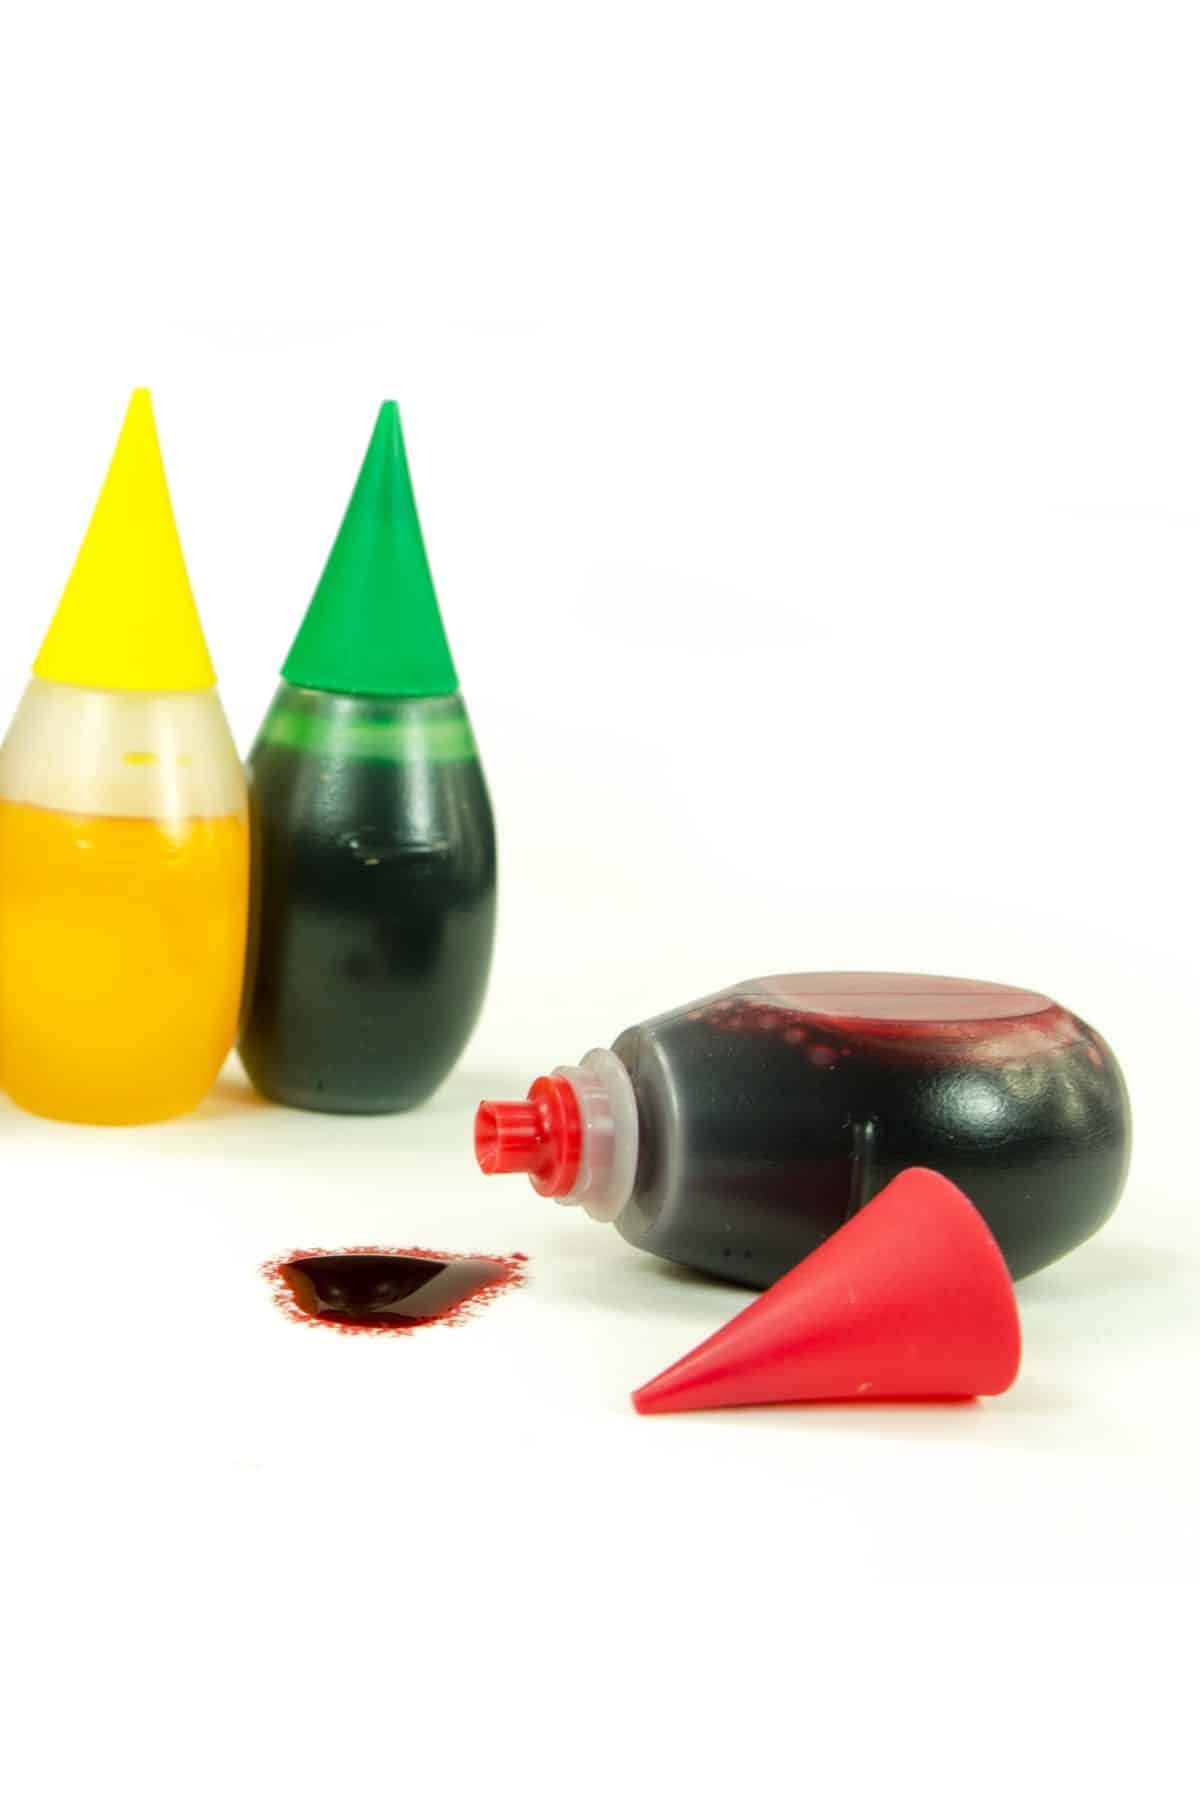 yellow, green and red food coloring bottles, with the red turned on its side spilling out.